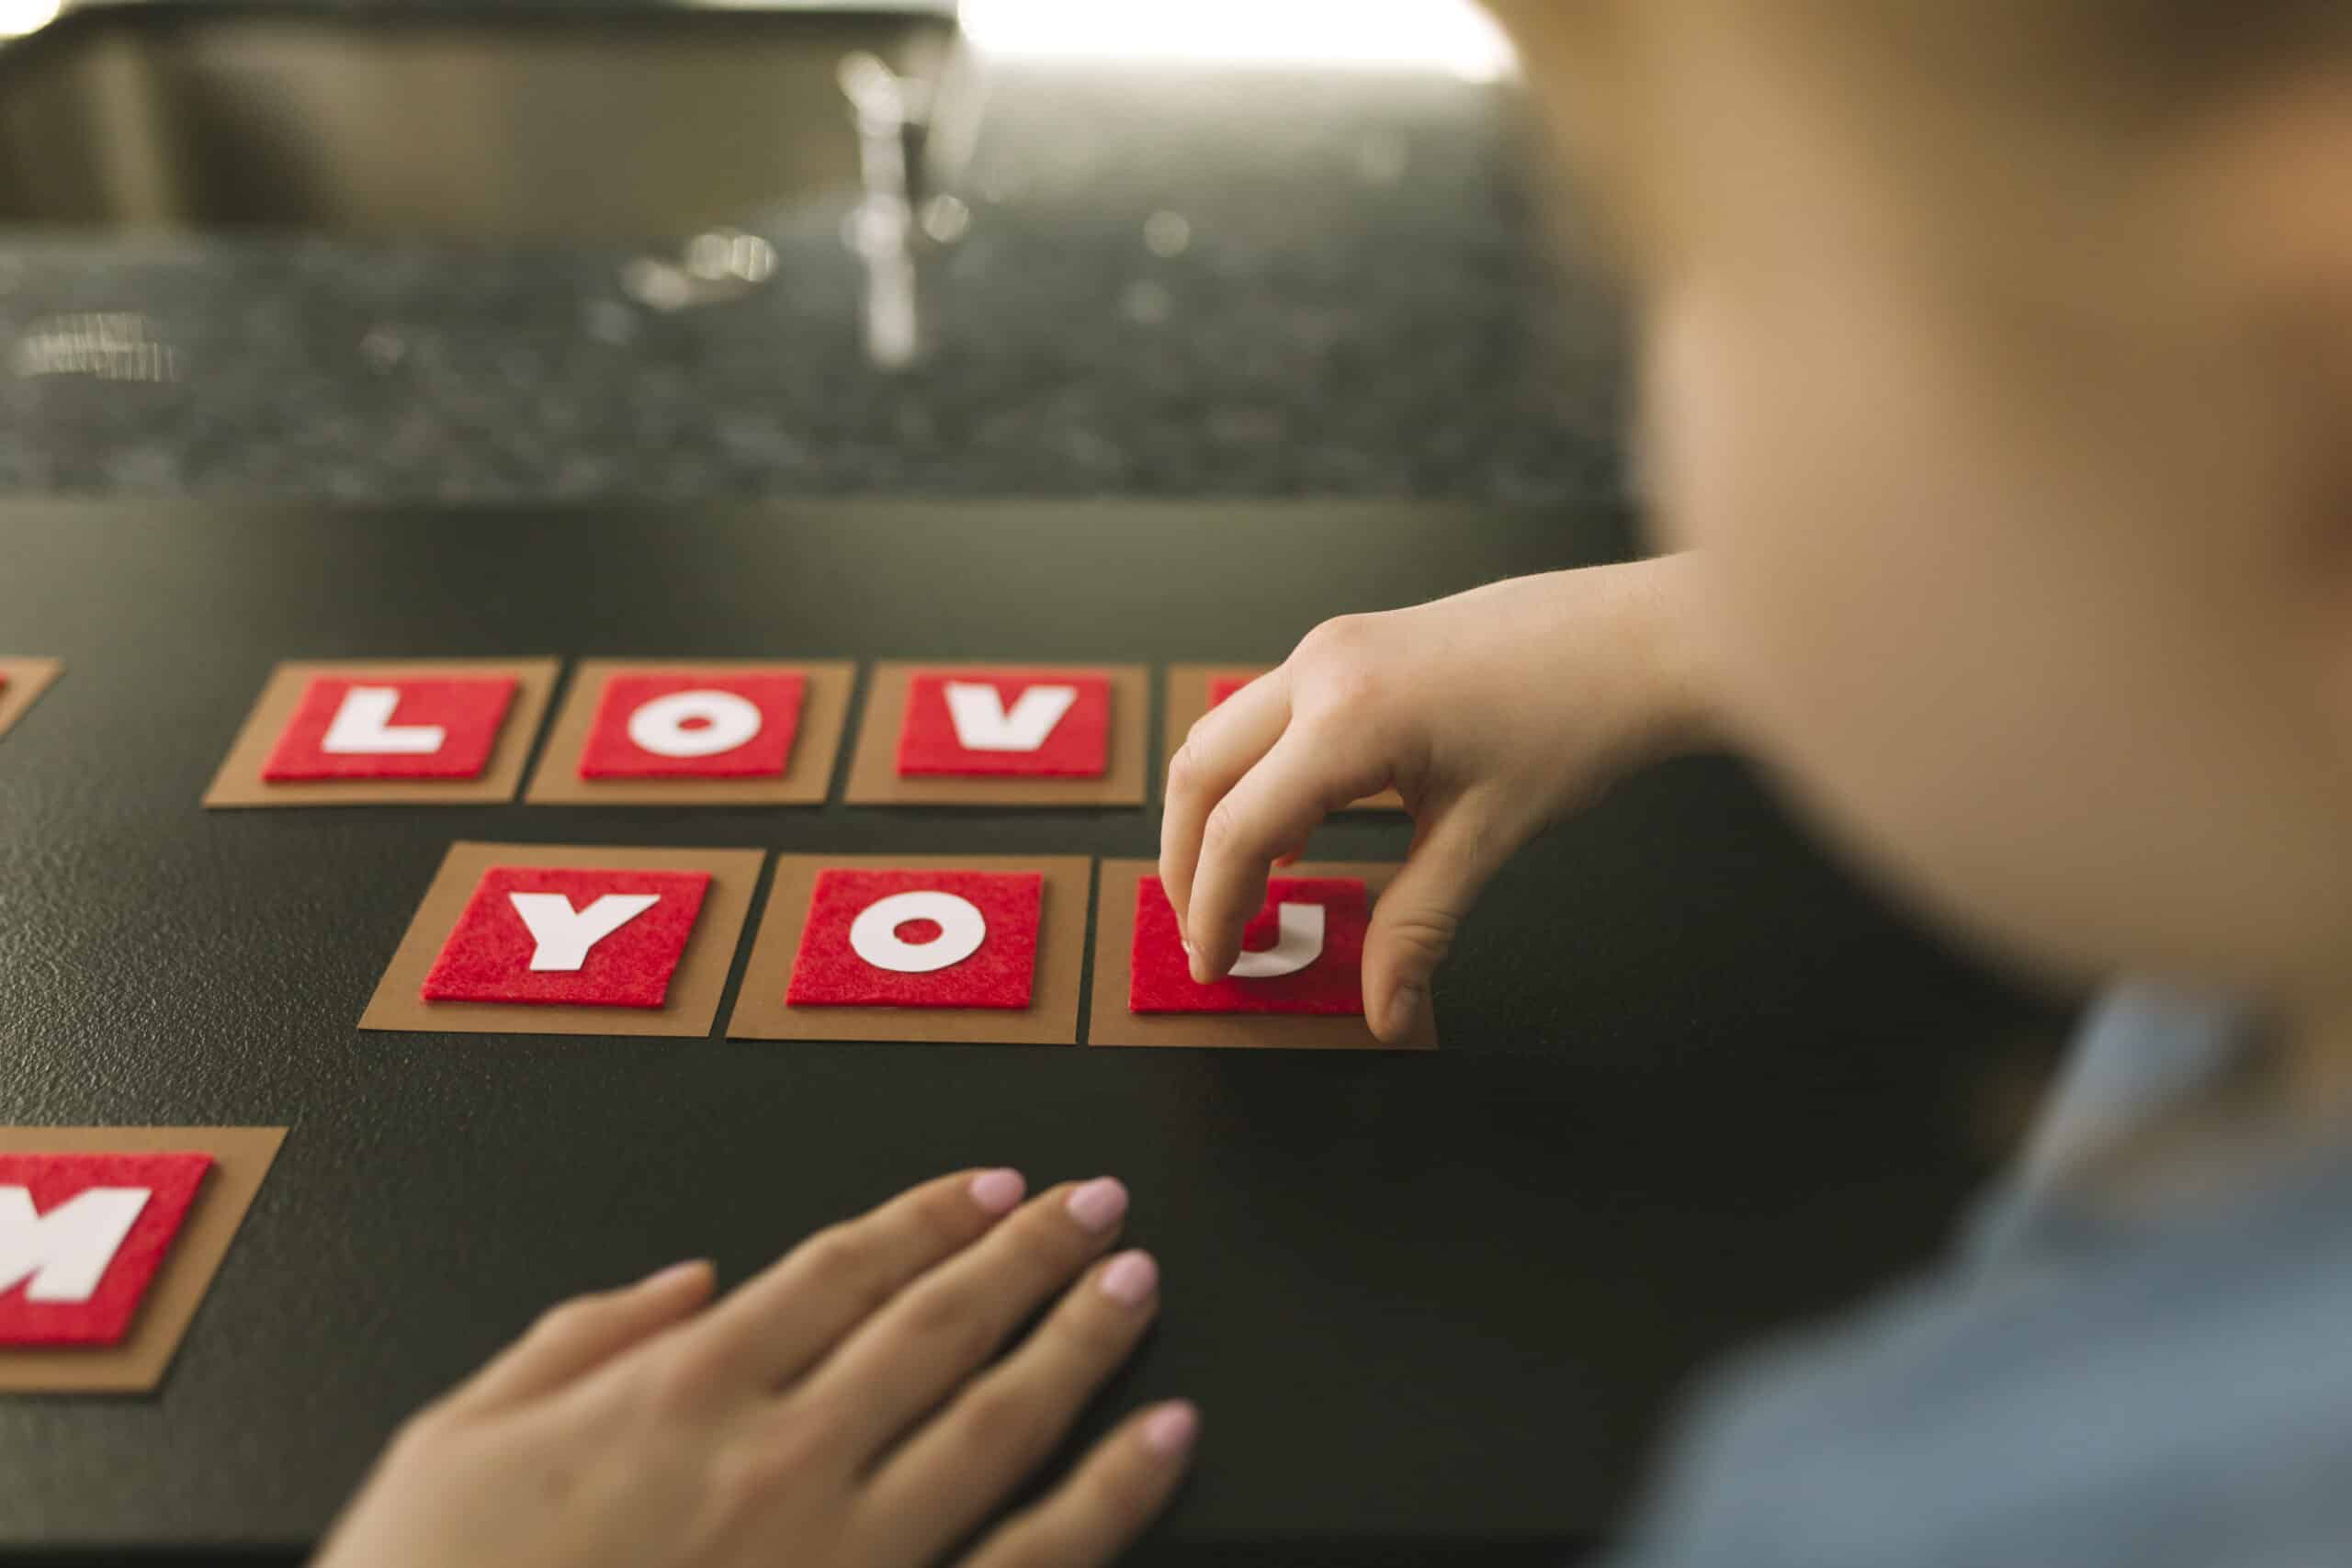 Child playing with letters, spelling out "Love you".